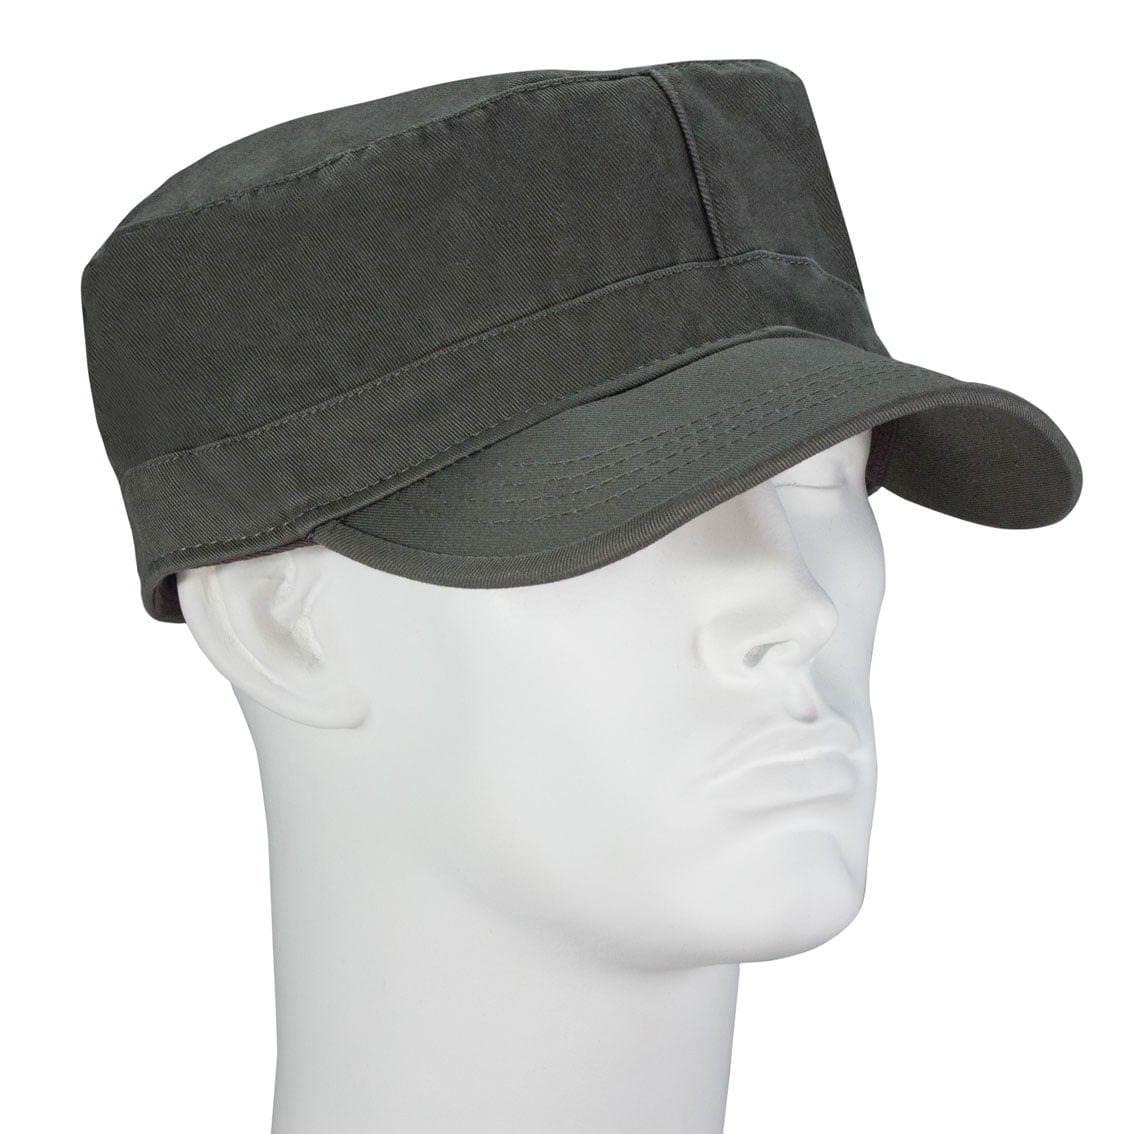 1pc Olive Solid Castro Military Fatigue Army Hat - Fitted - Unconstructed - 100% Cotton